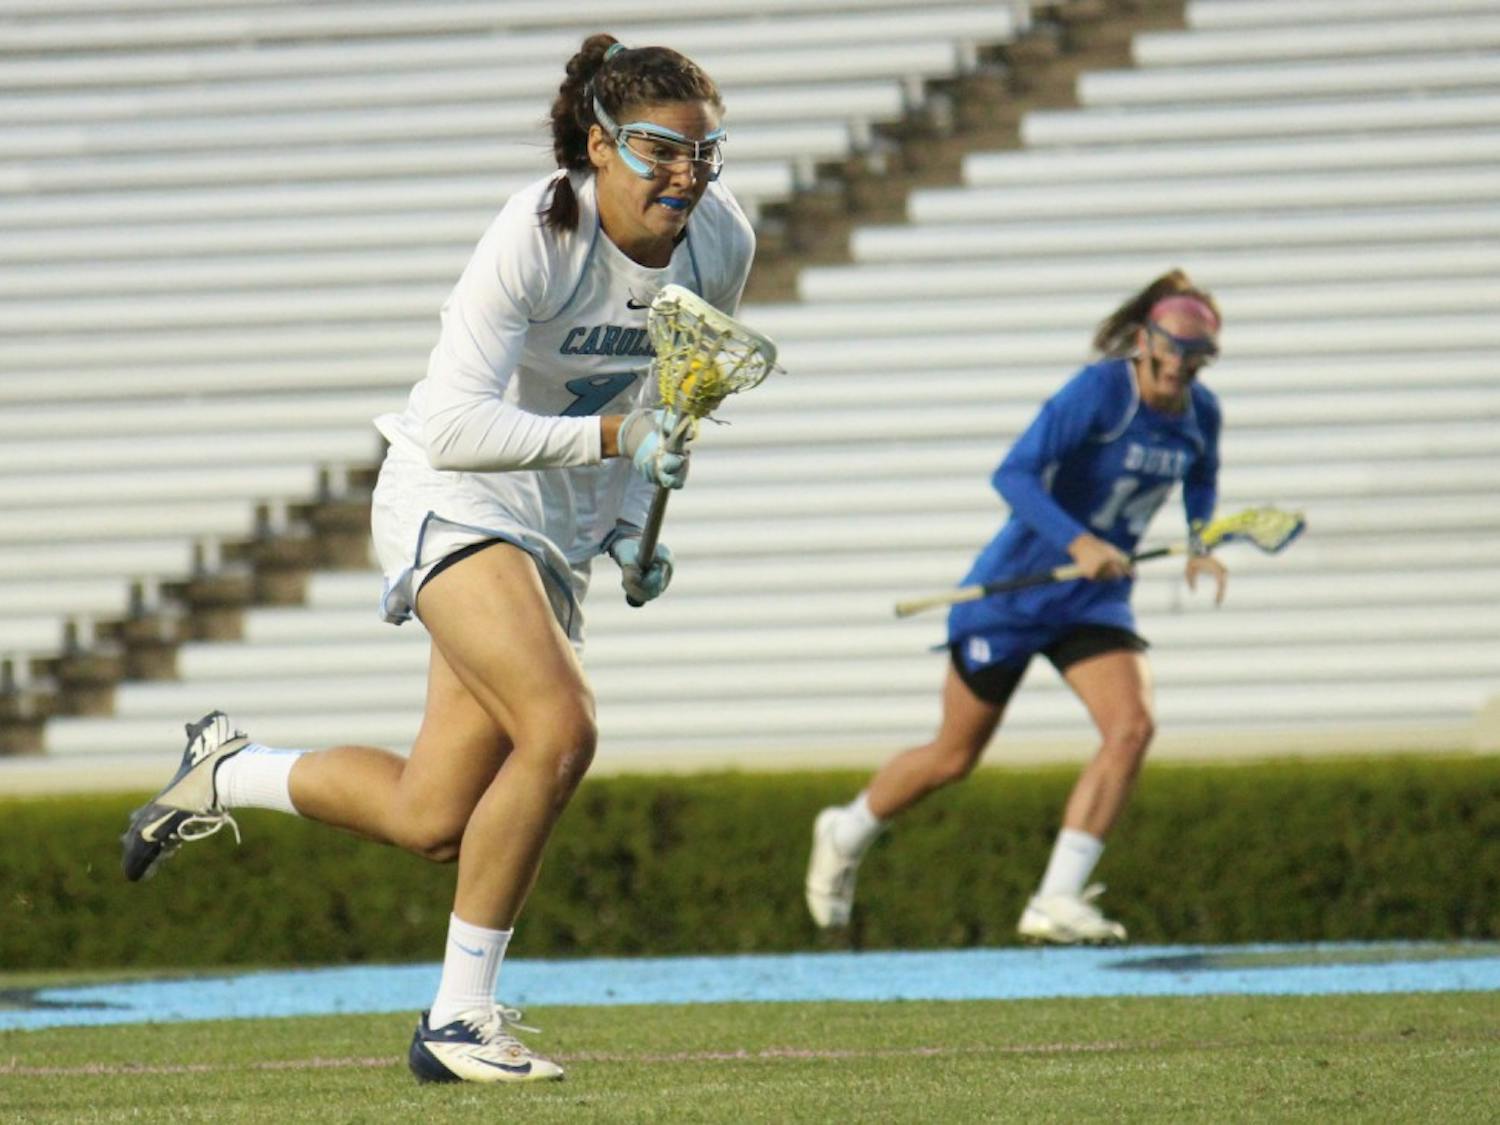 Women's lacrosse suffers a loss 7-6 to Duke in overtime on Wednesday in Kenan Stadium. No. 9 Margaret Corzel sprints downfield during the second half. 